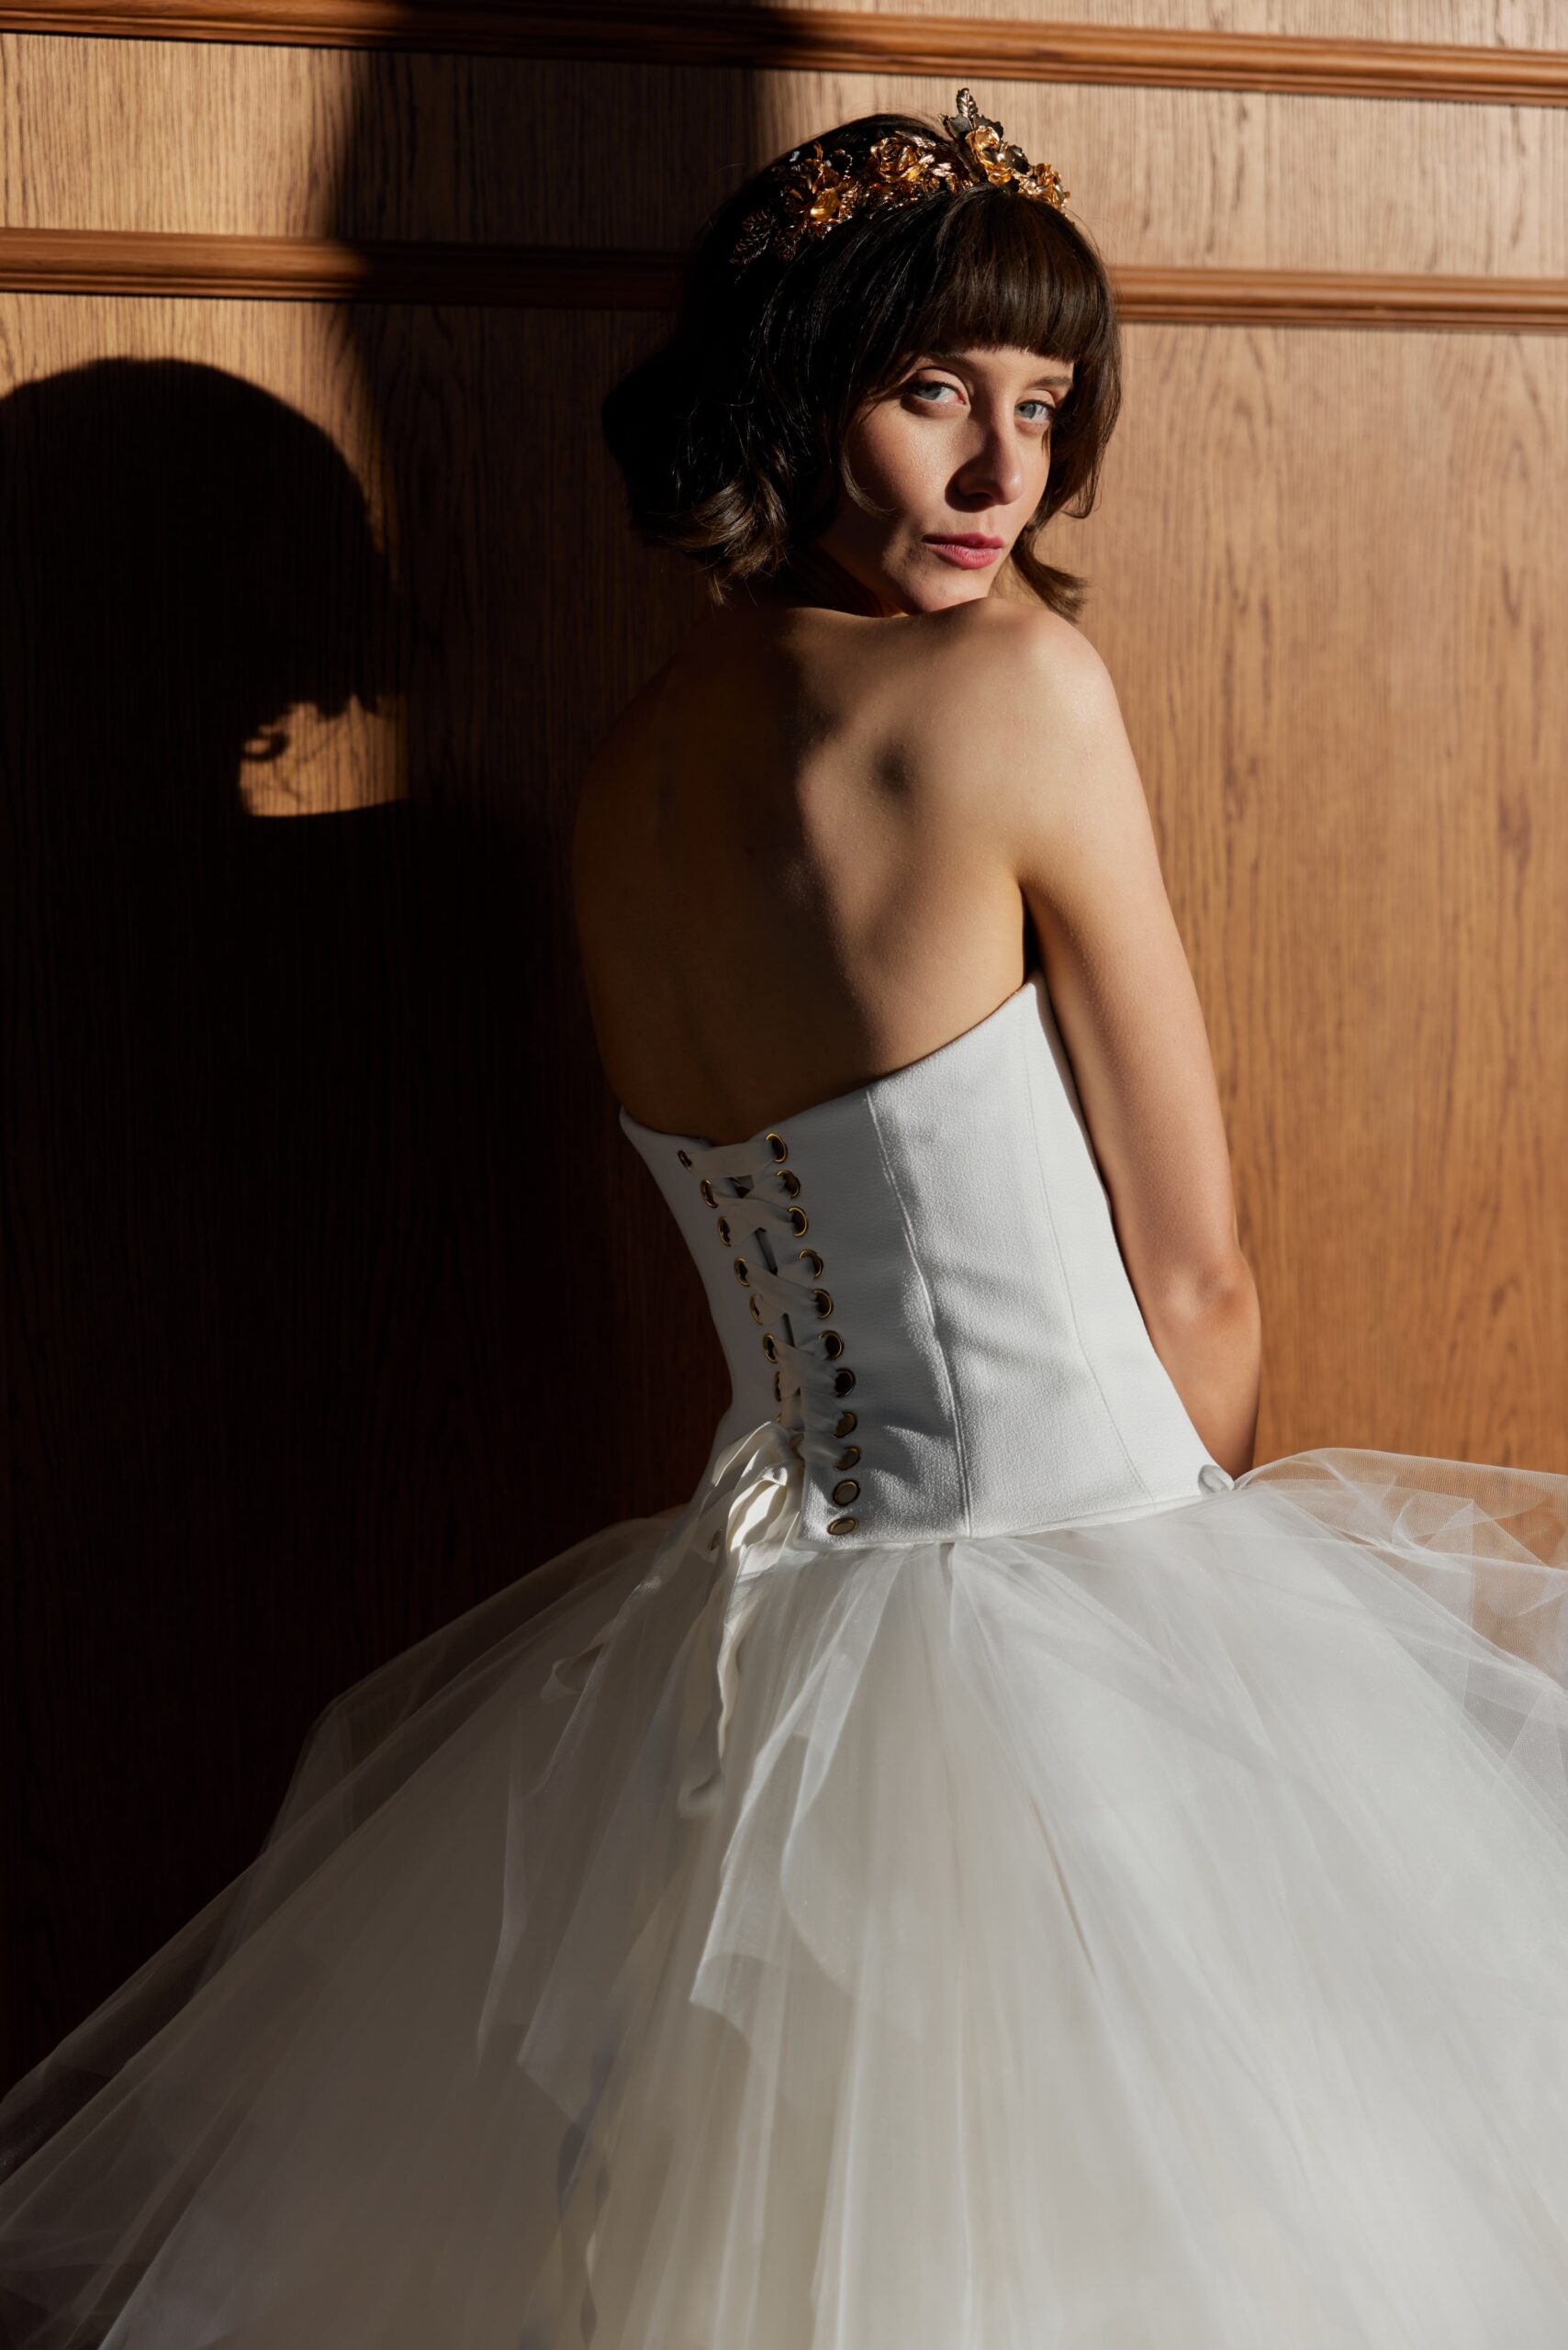 Zelie top and Frou Frou skirt - a strapless corset style bodice with a lace up back worn with a decadent ruffled tulle skirt.